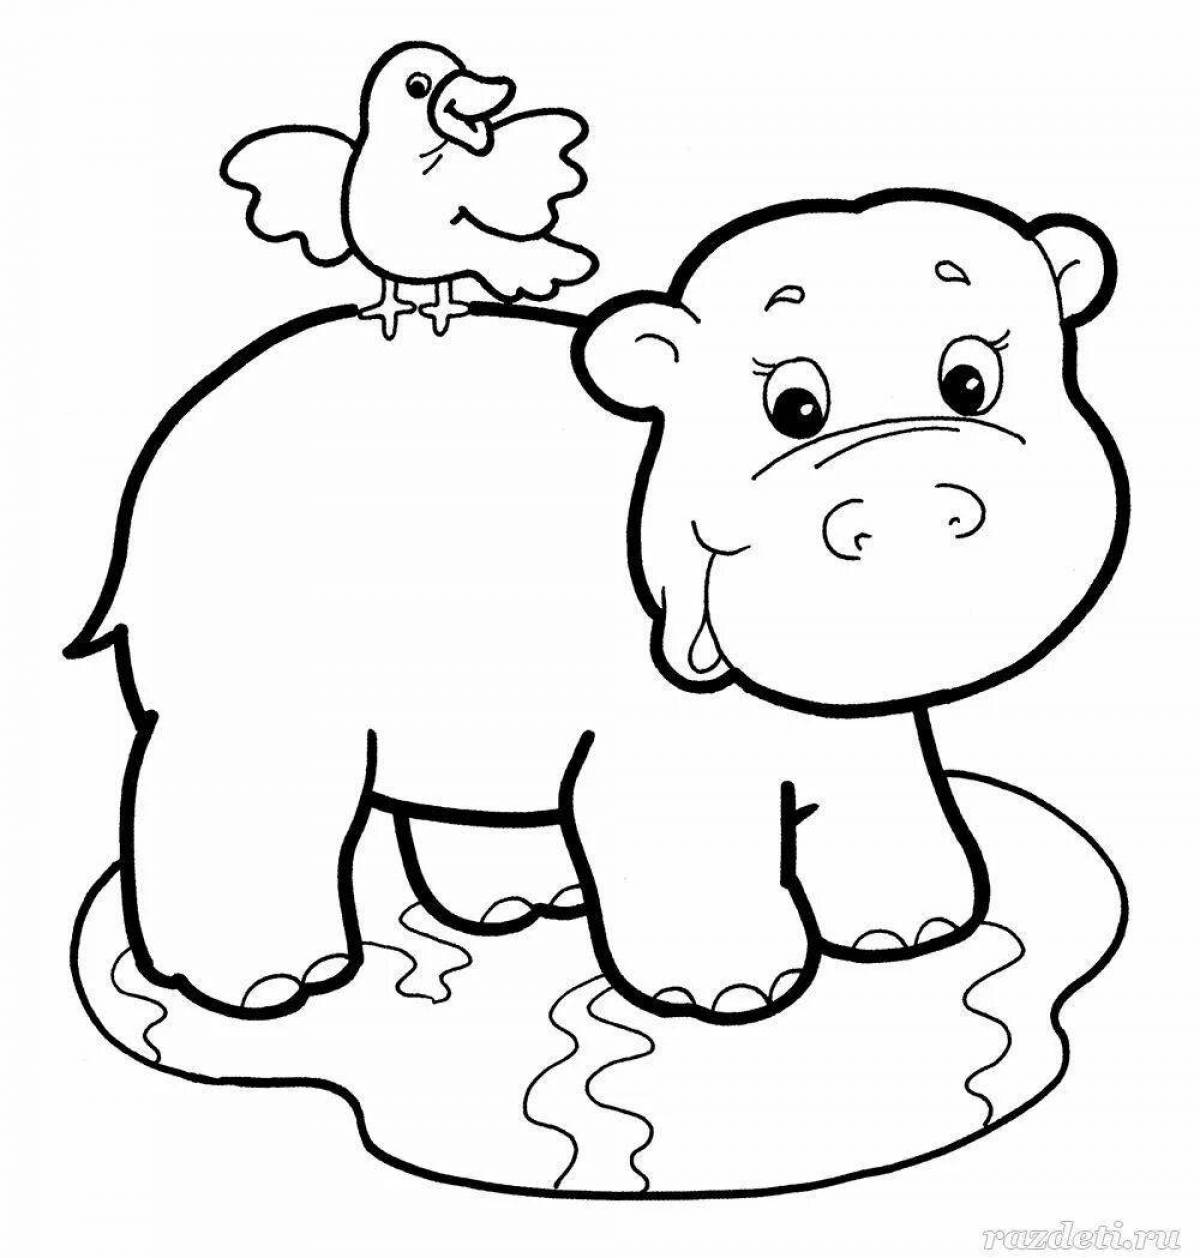 Cute animals coloring pages for kids 3 4